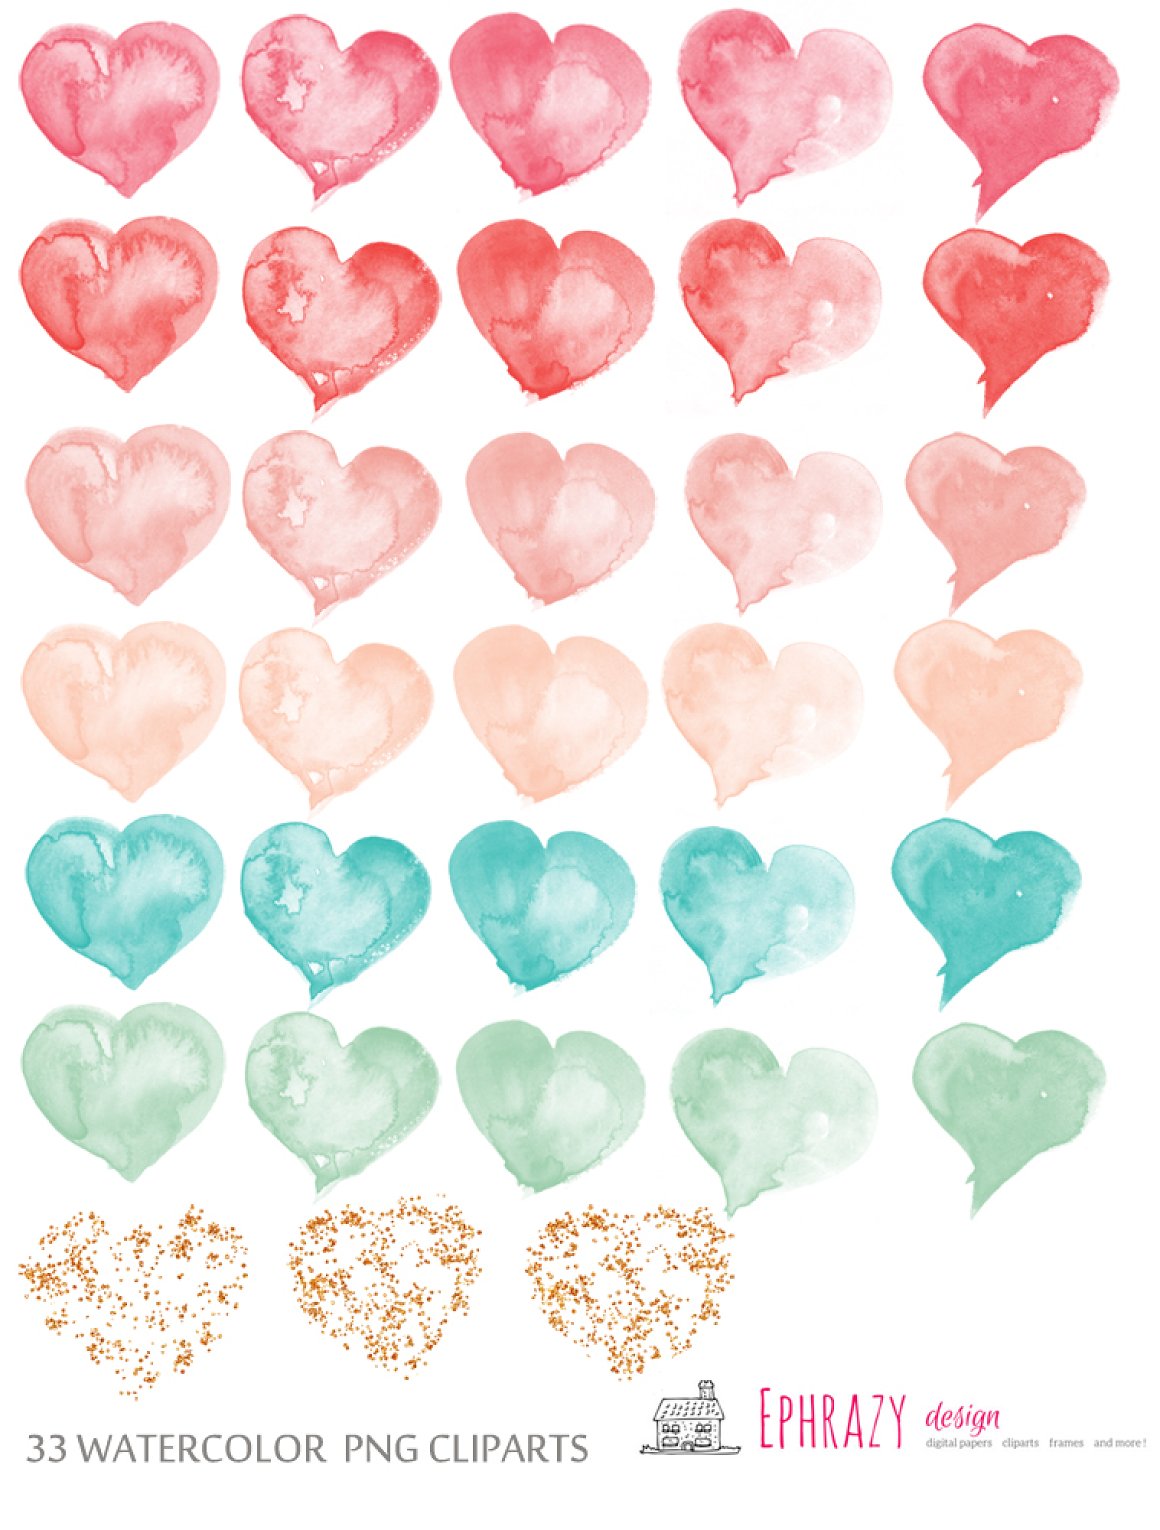 Crazy hearts of different colors.